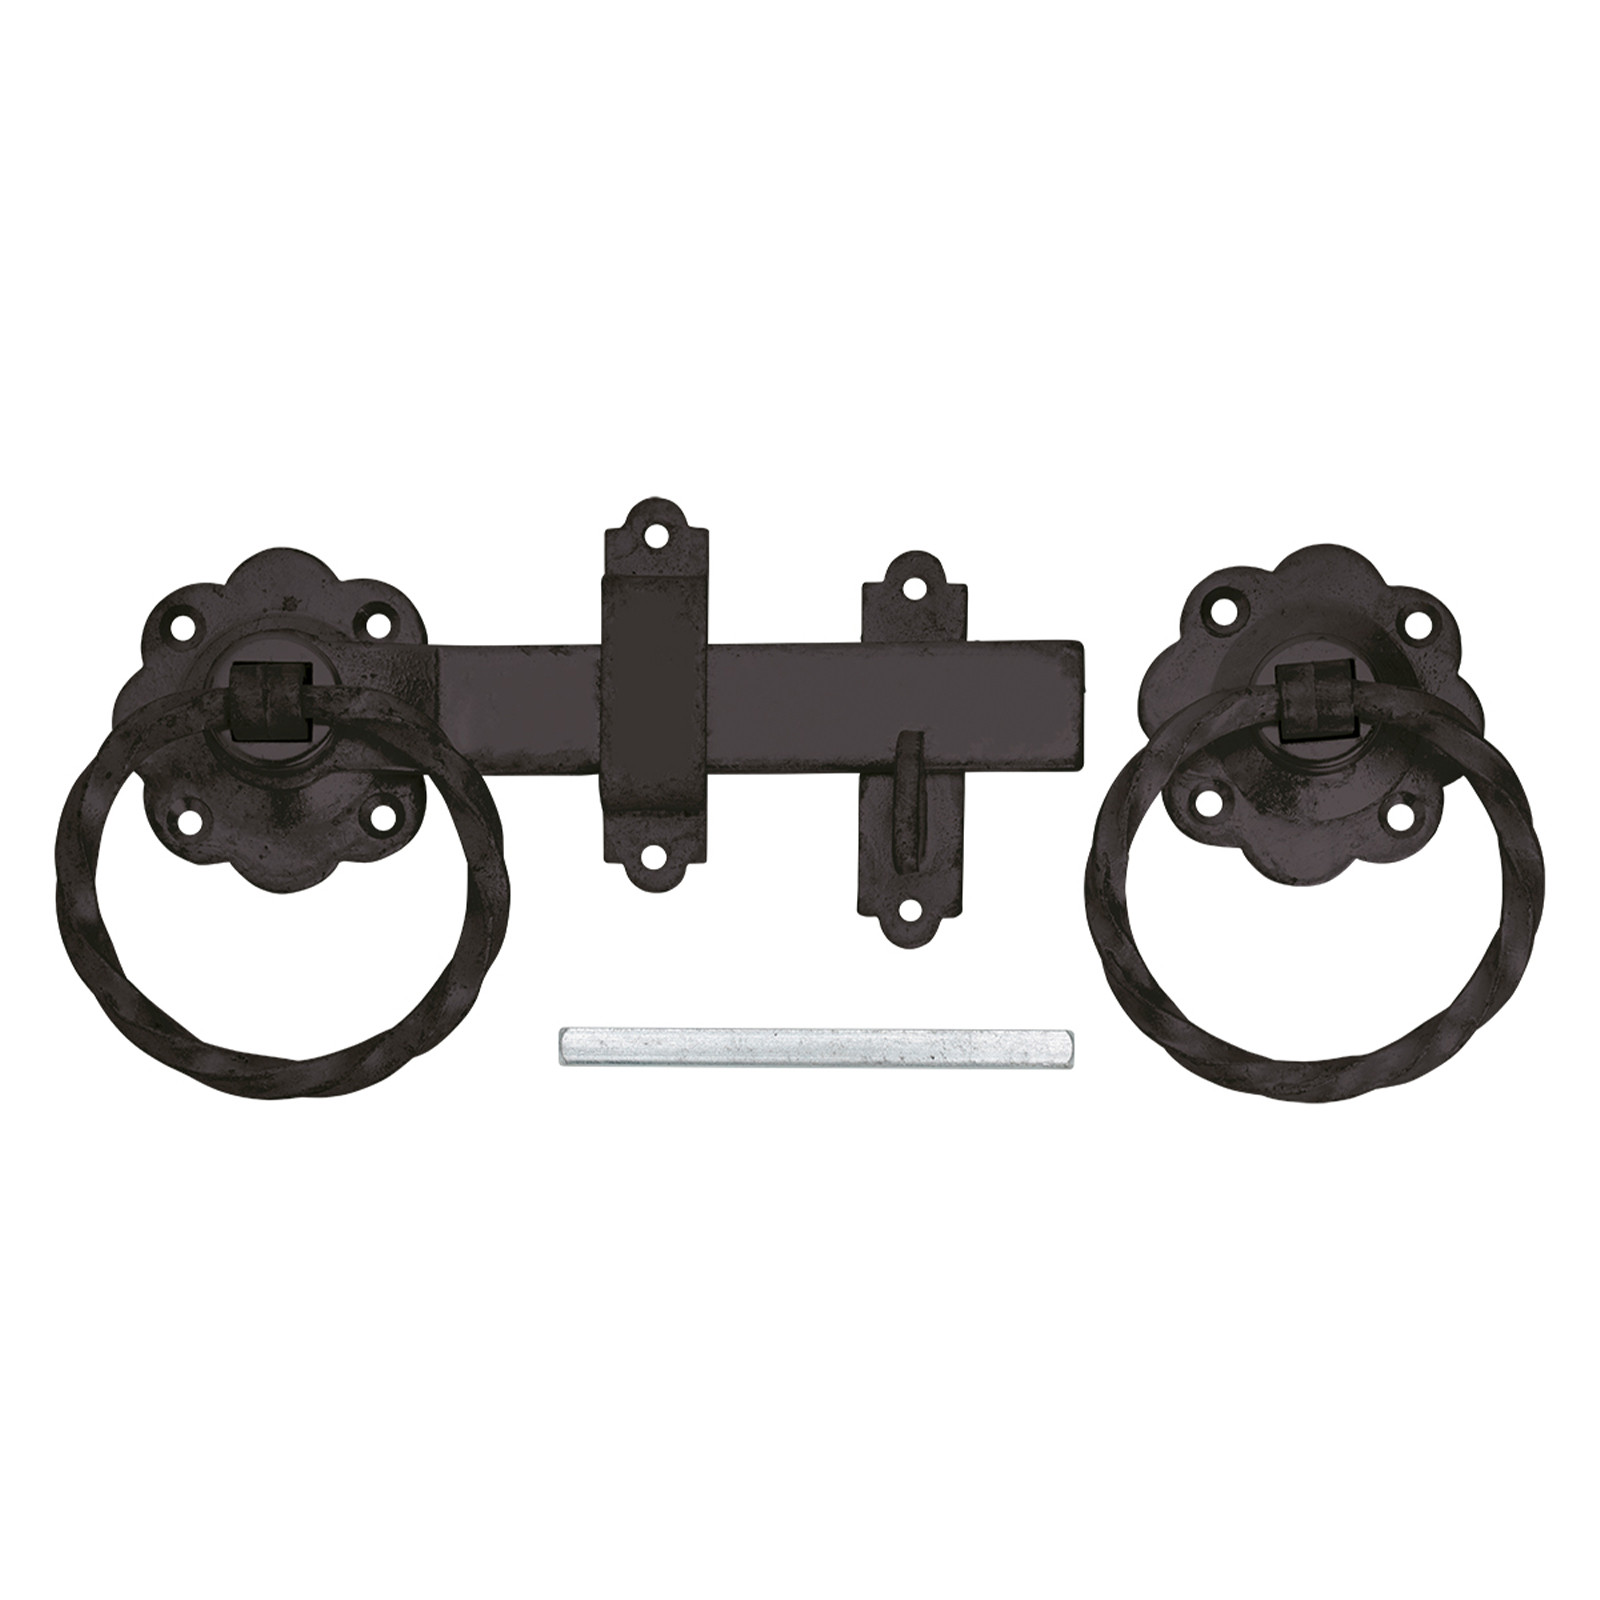 No.1137 Twisted Ring Gate Latches